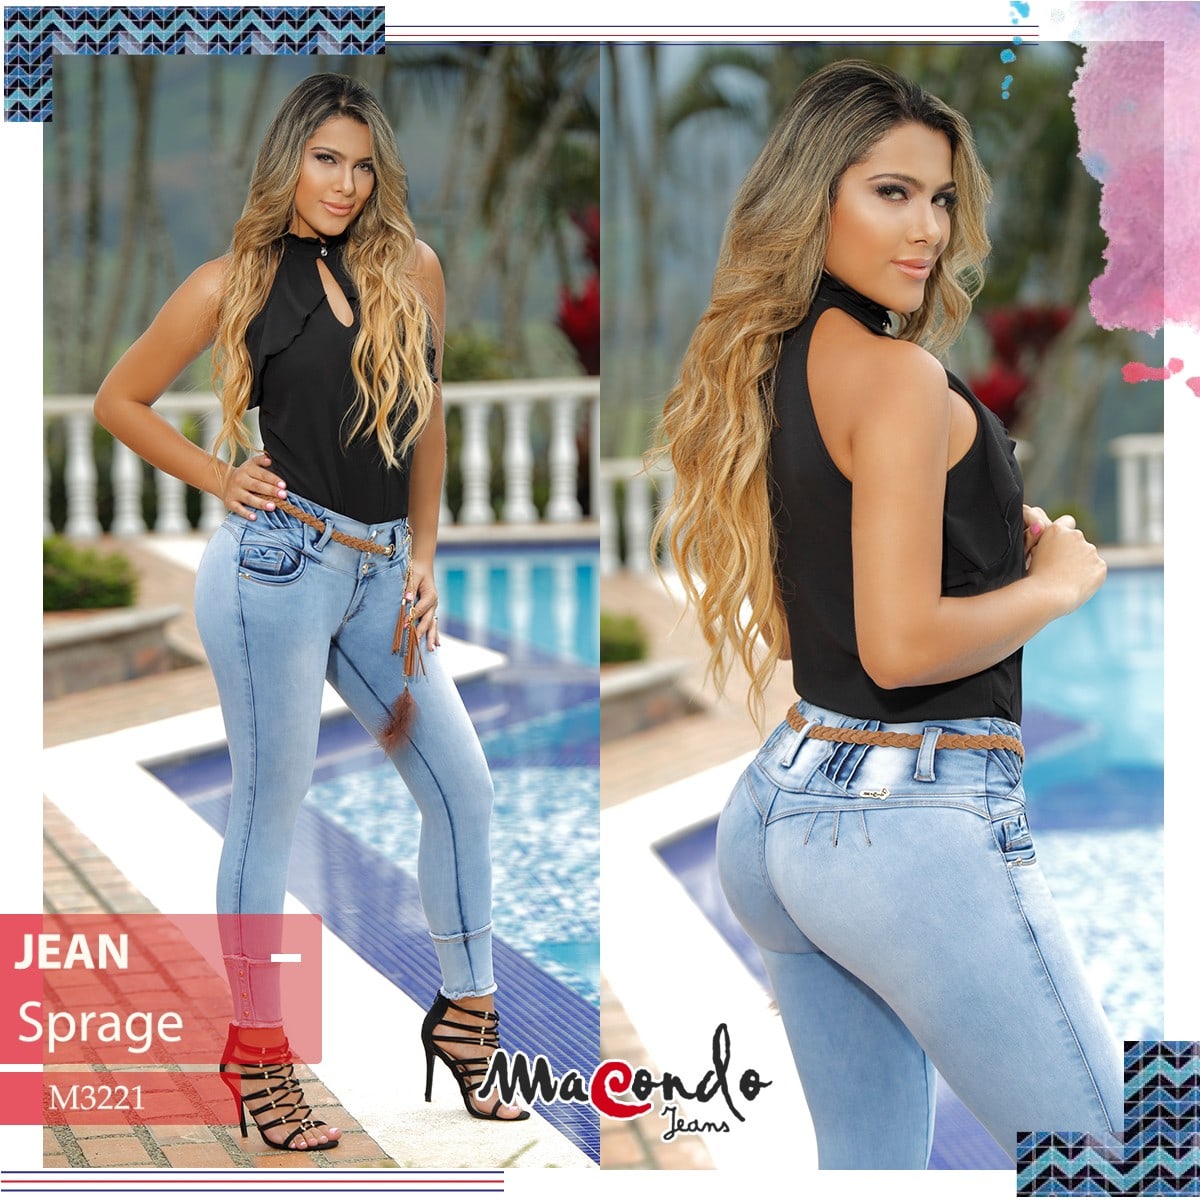 jean-M3221-colombia-jeans-min - Macondo Jeans Colombianos